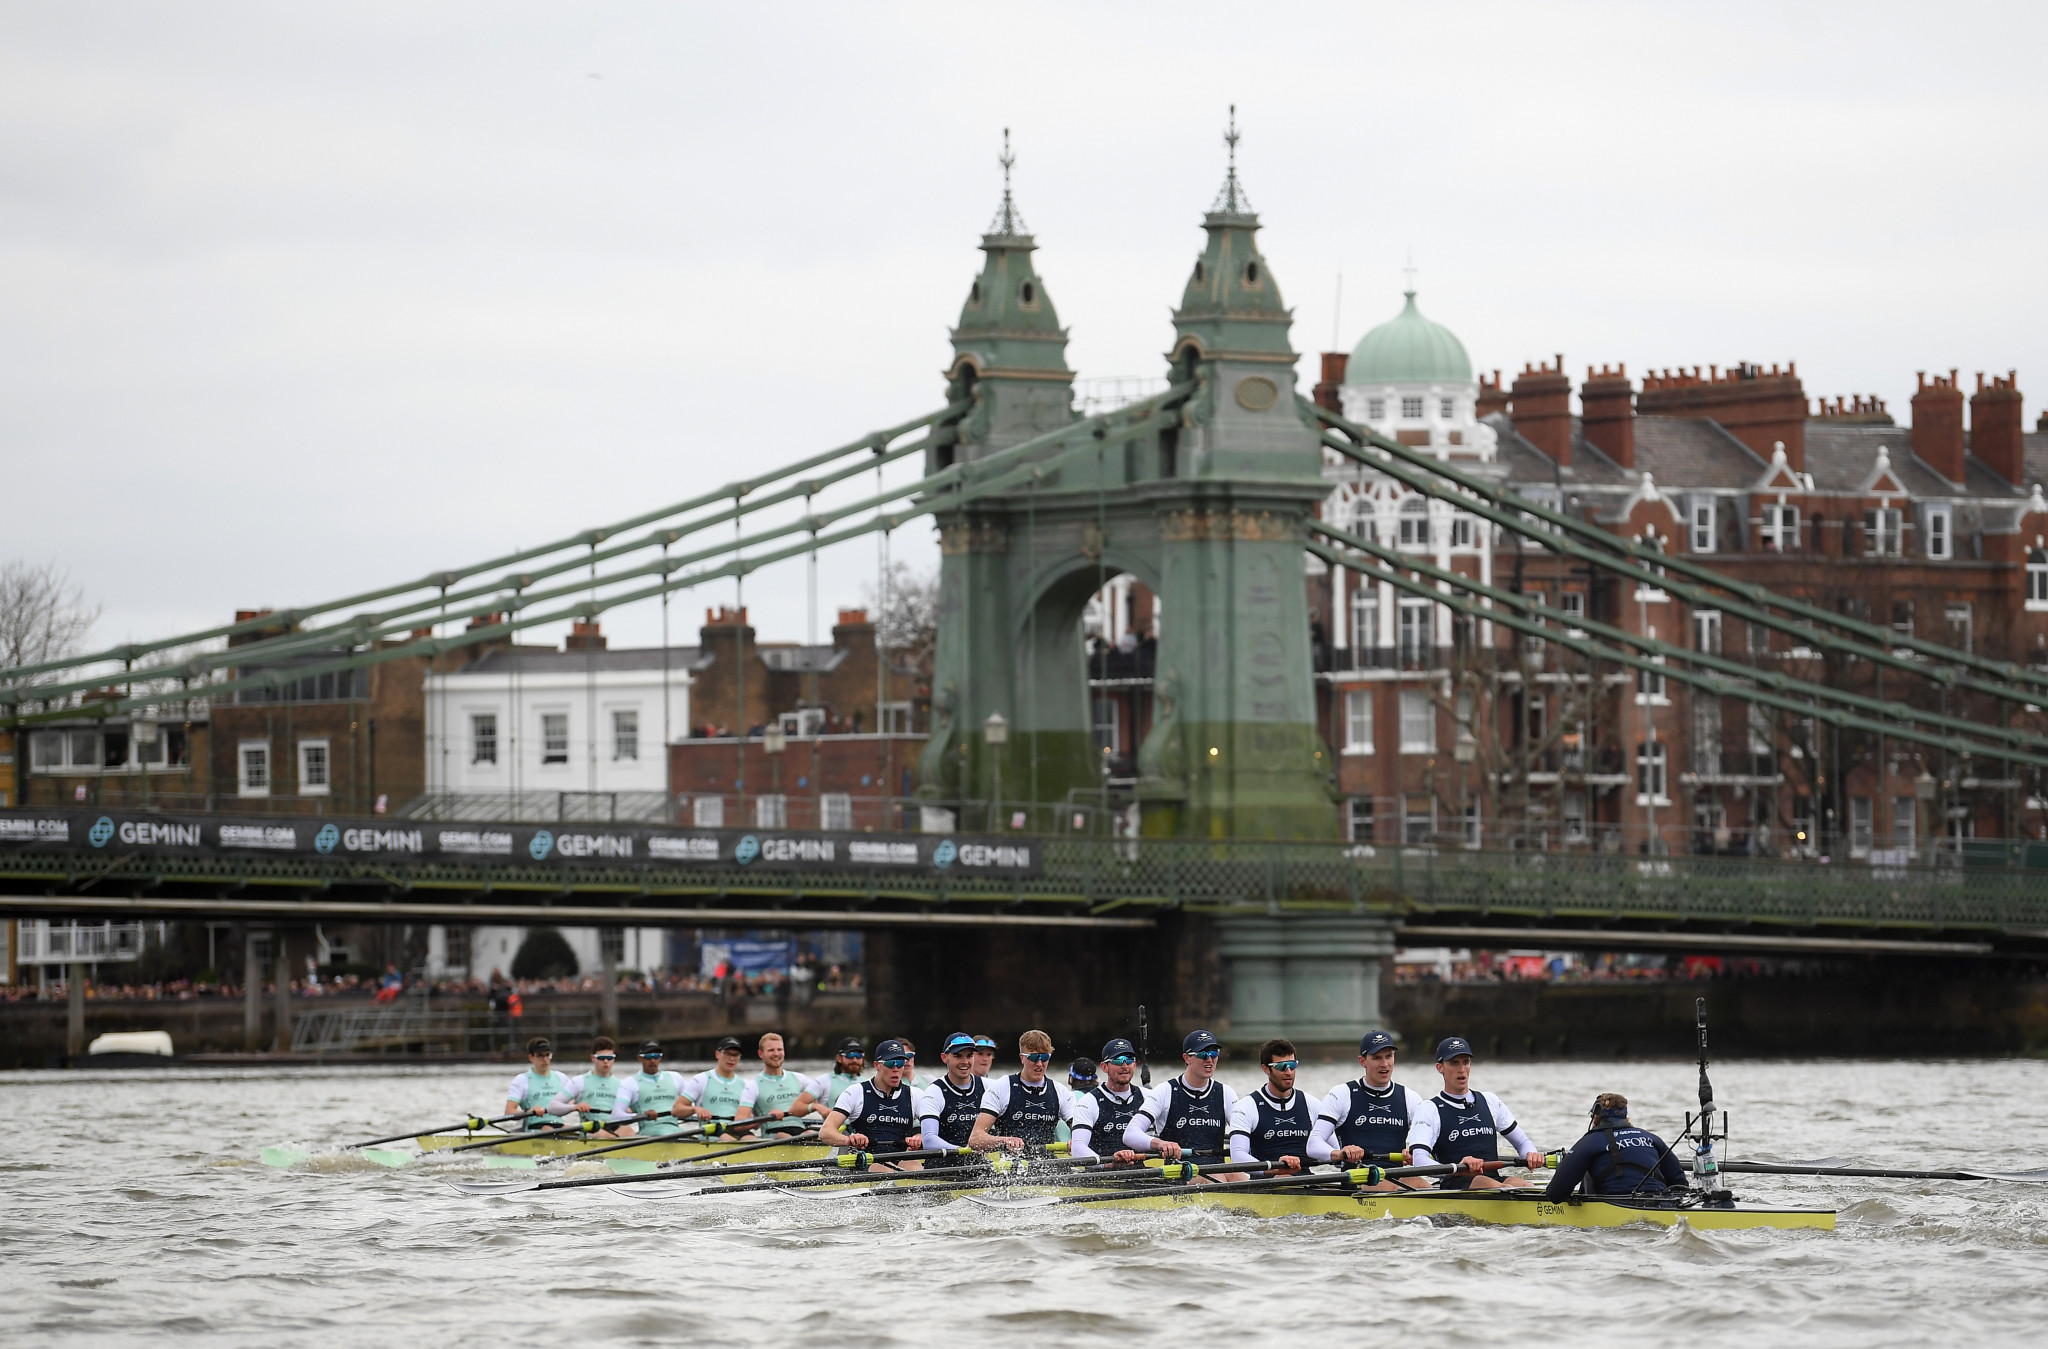 The University of Cambridge won the boat race last week in a contest worthy of the rich history of the event ©Getty Images